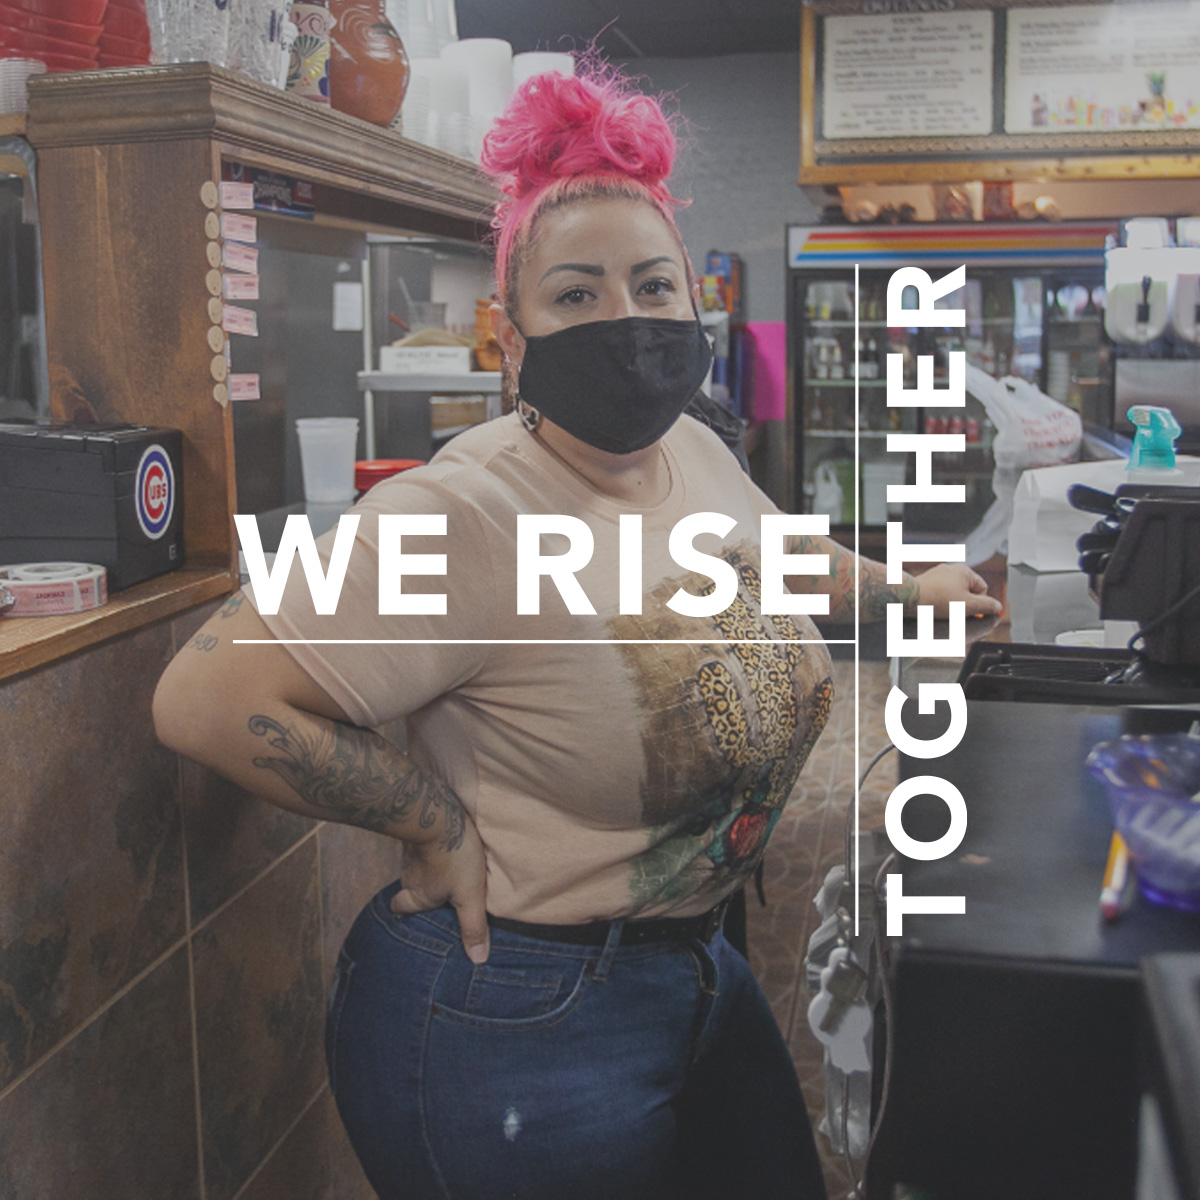 We rise together. Photo shows a woman with pink hair in a convenience store.